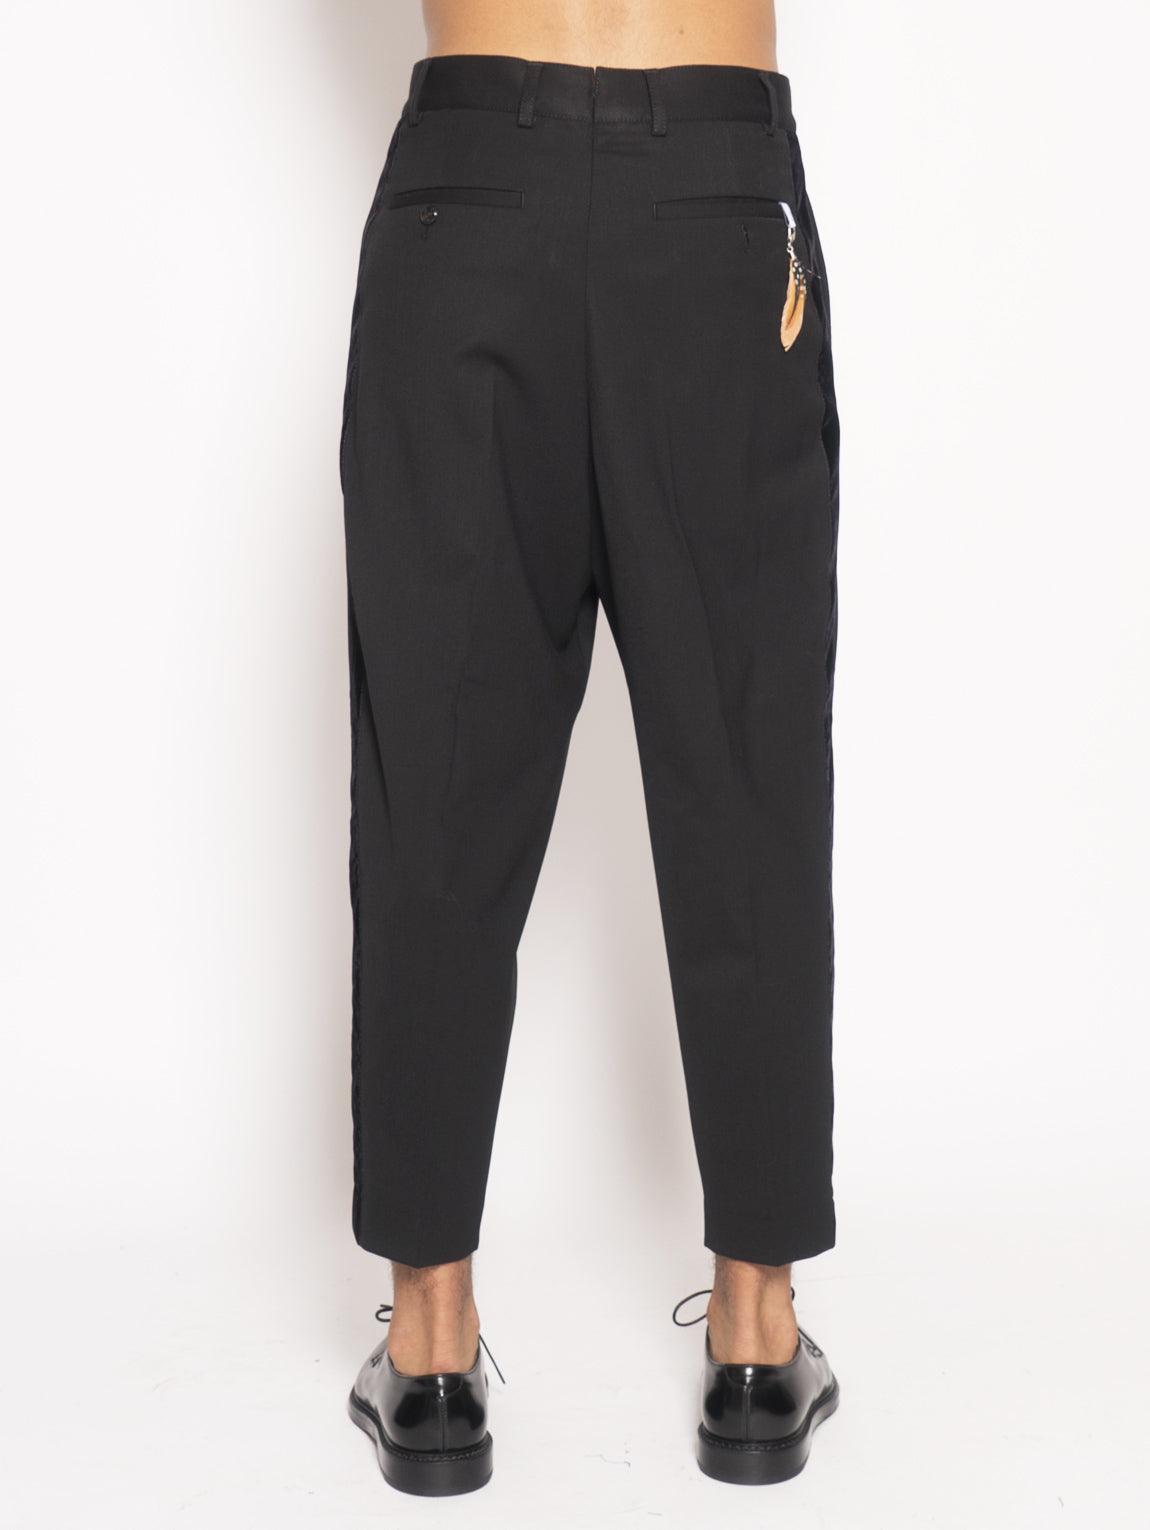 Forward trousers with black side band